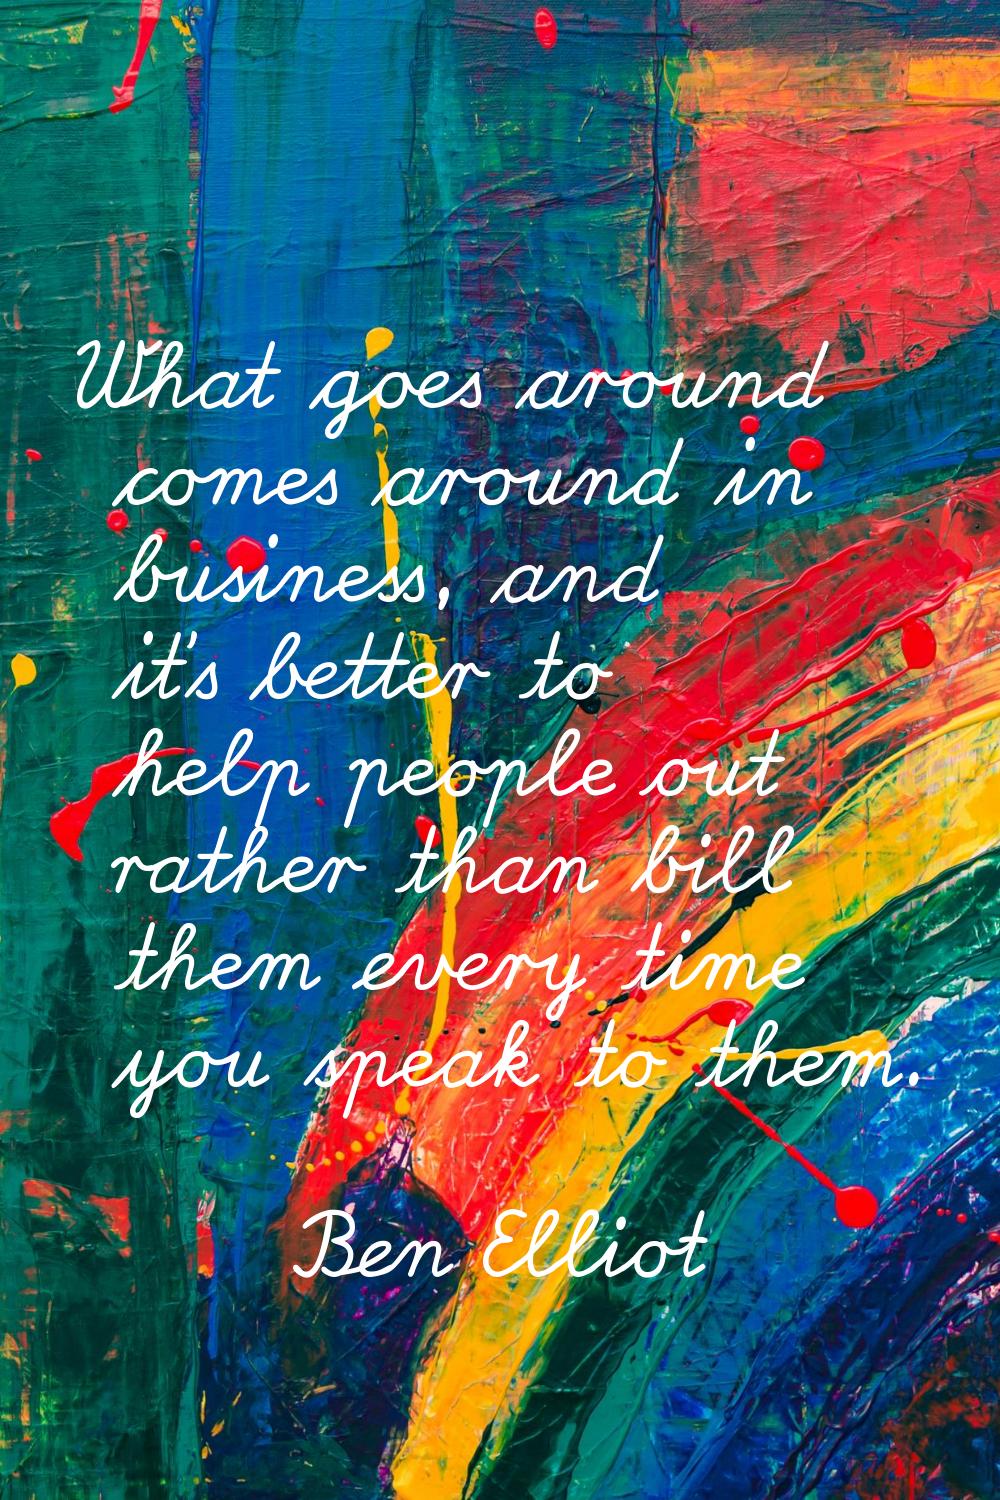 What goes around comes around in business, and it's better to help people out rather than bill them